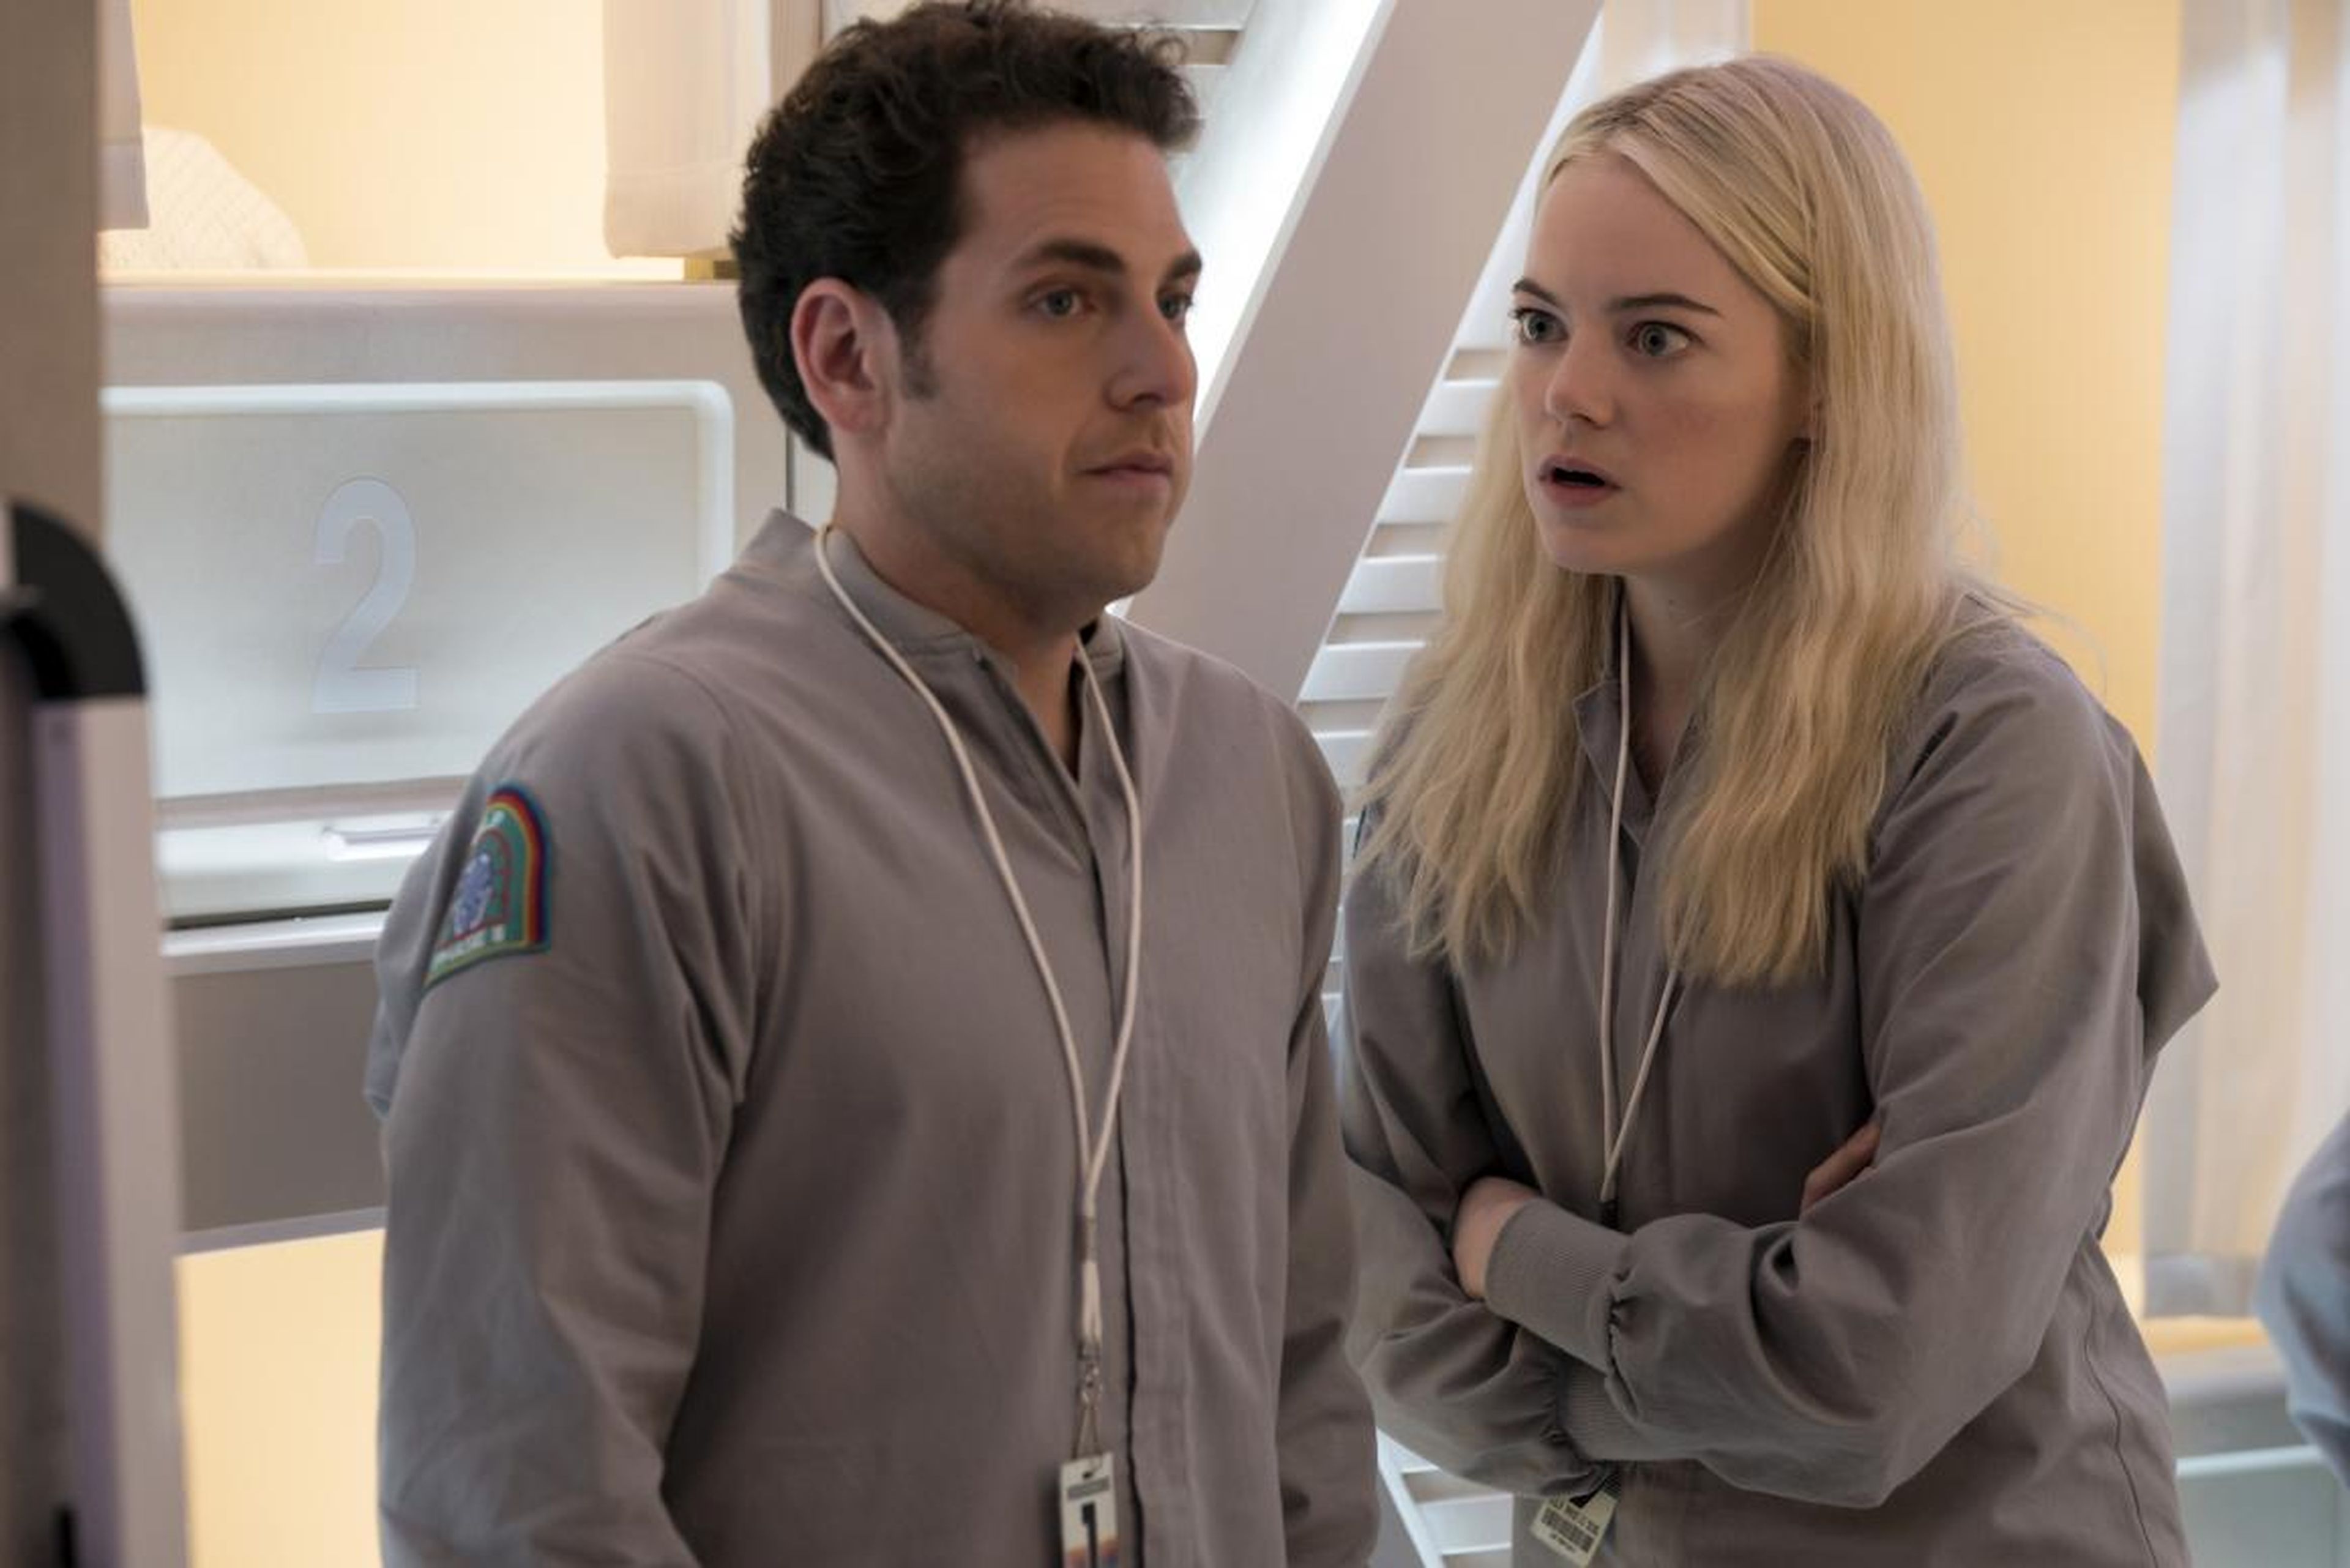 Jonah Hill and Emma Stone in the upcoming Netflix series "Maniac."